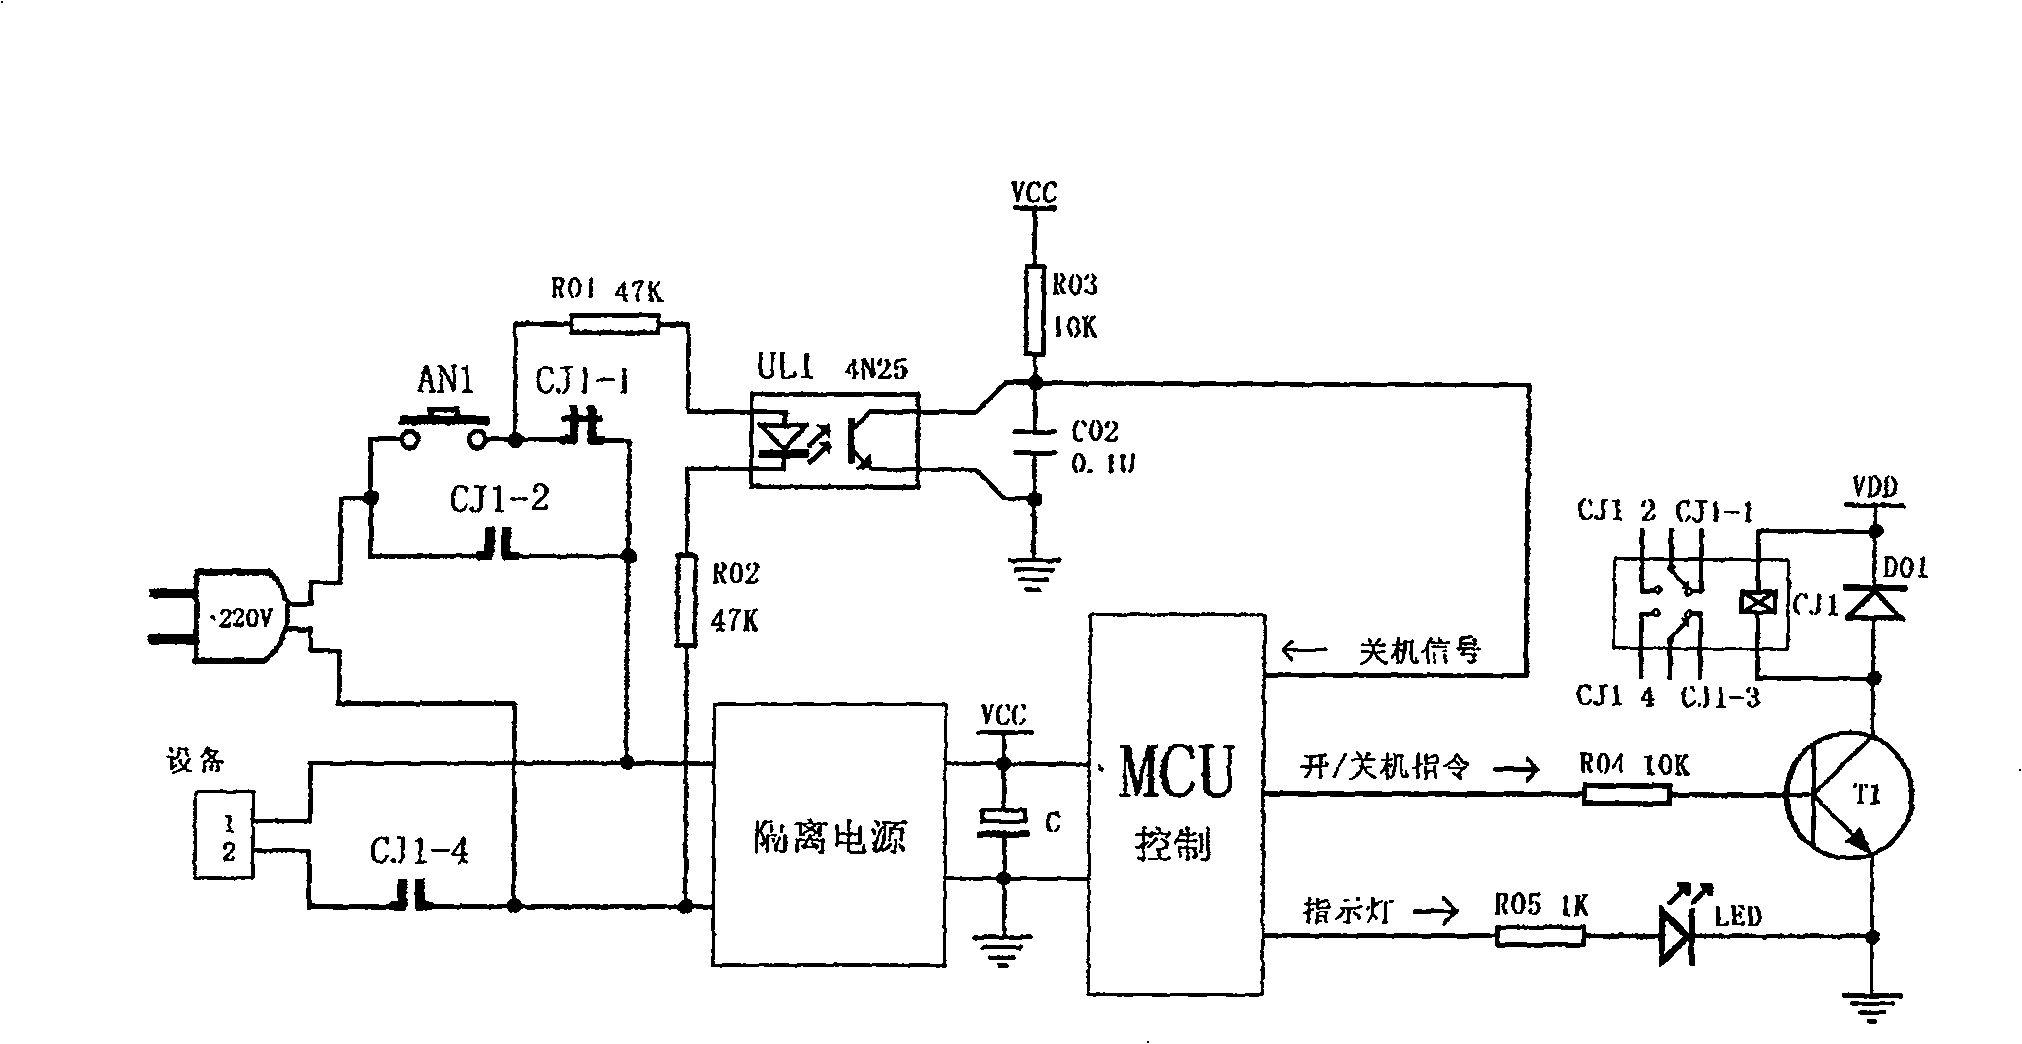 Standby free programmable power supply on-off circuit with single push button